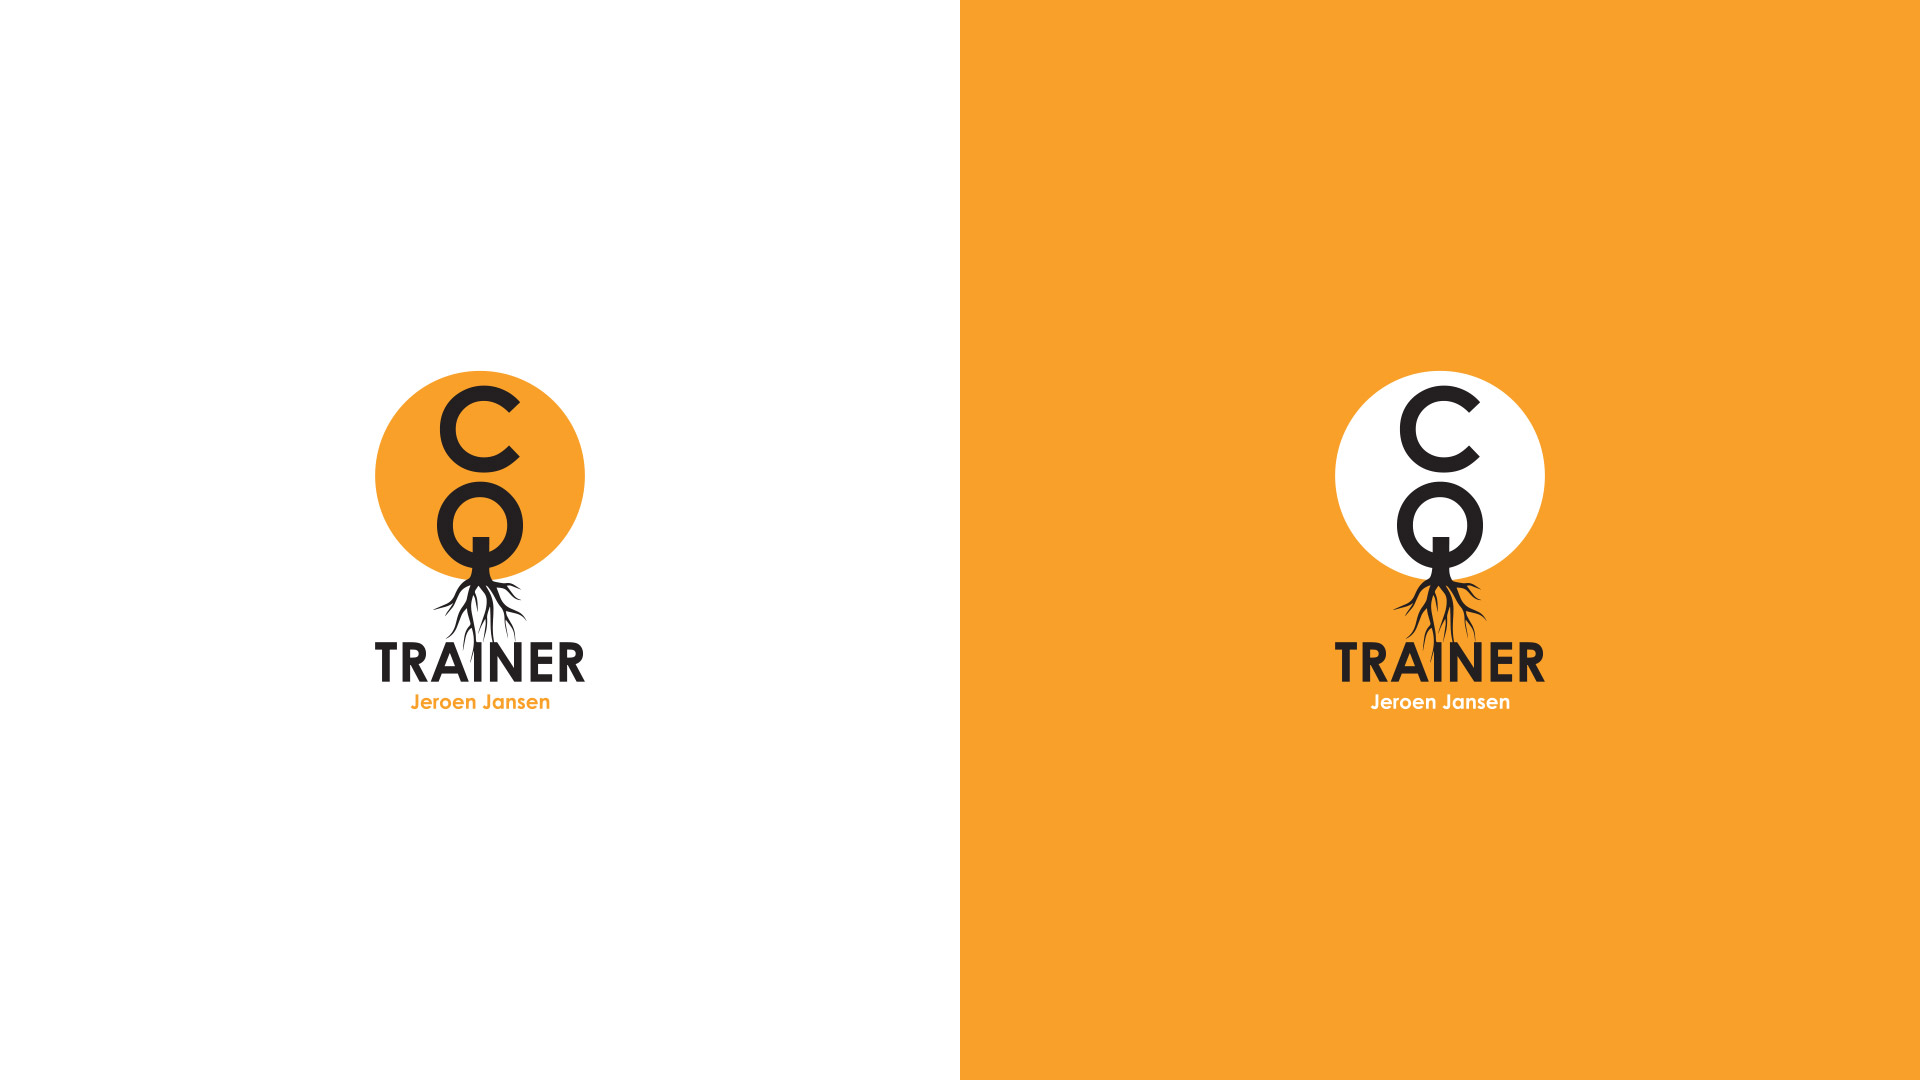 Cover for CQ trainer logo. Cultural Intelligence or cultural quotient